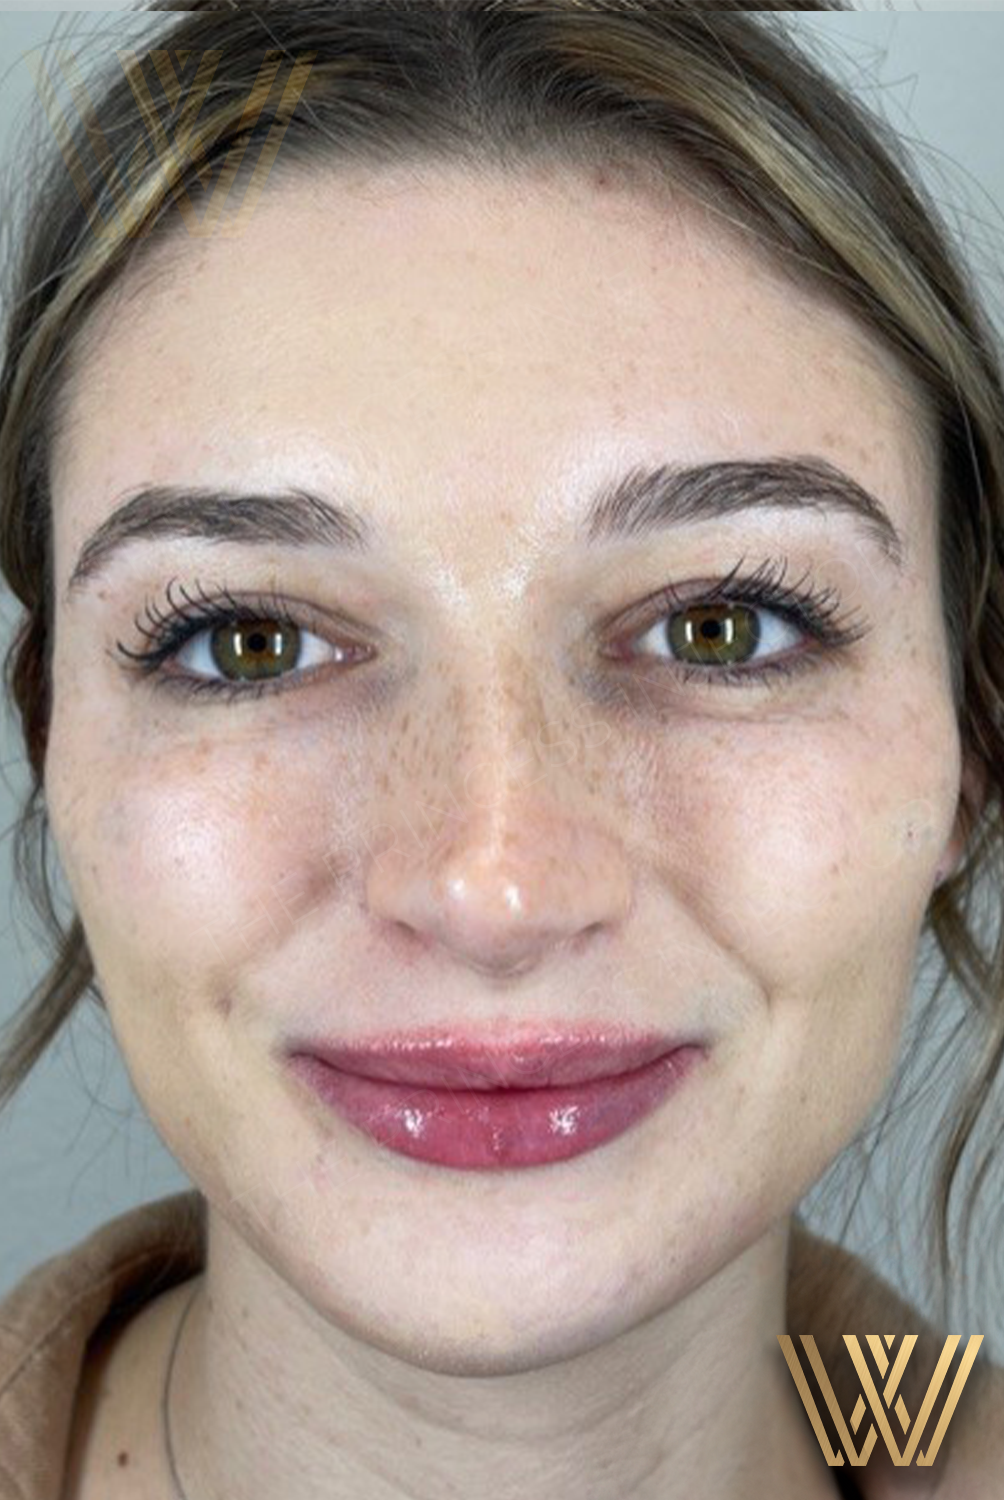 Transformed face of Client 4, thanks to the meticulous MK Beautification service offered at Windermere Medical Spa in Orlando, revealing airbrush-like contours and enhanced natural beauty.